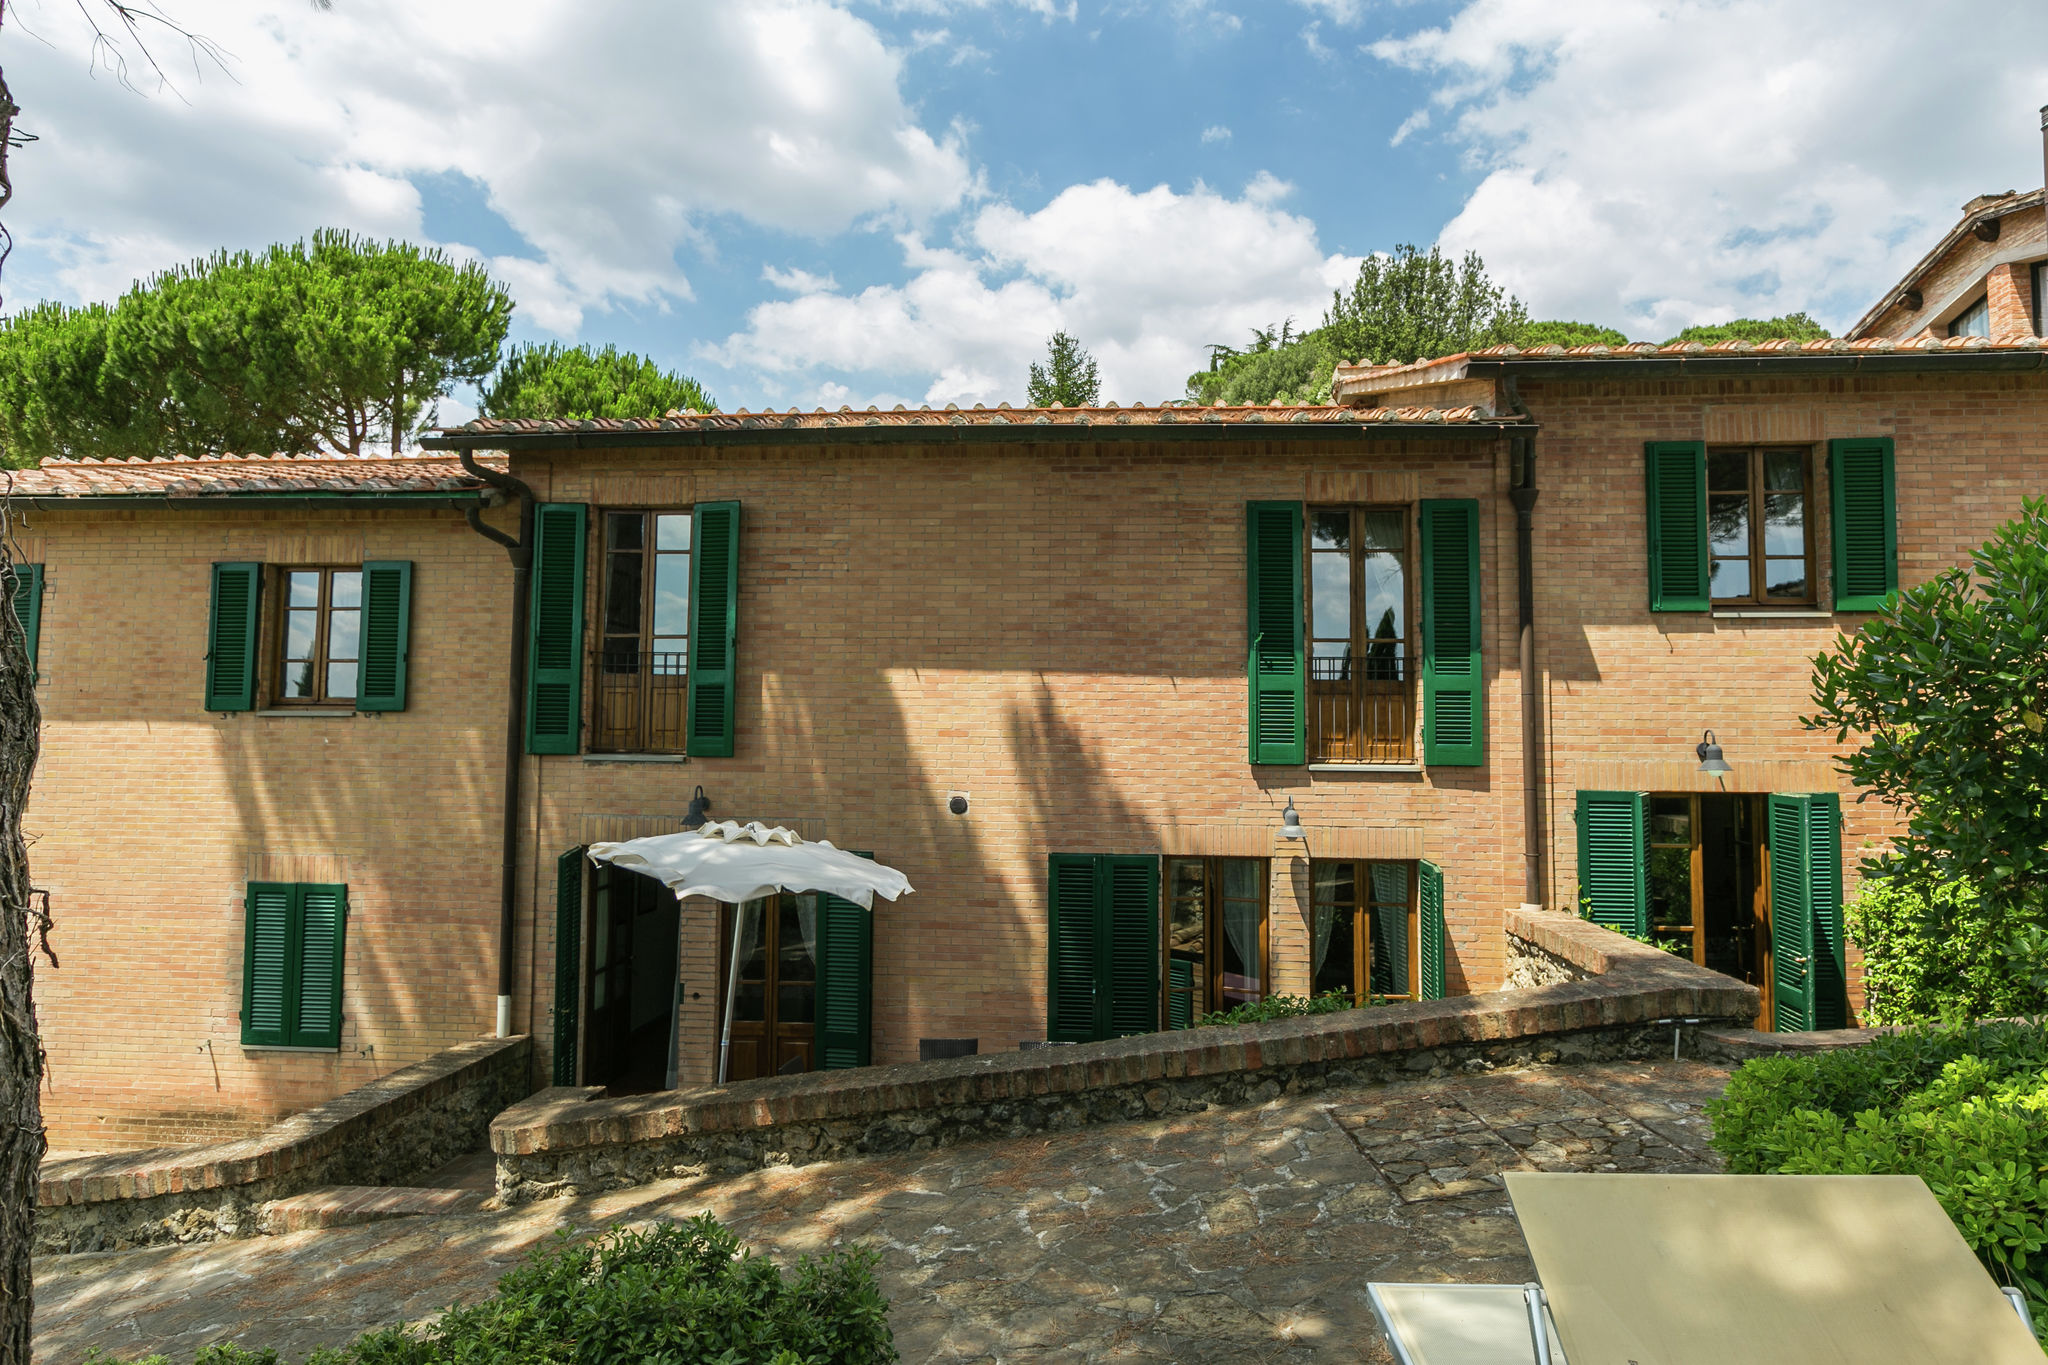 Holiday home 5 km from Sienna in the hills, swimming pool and garden